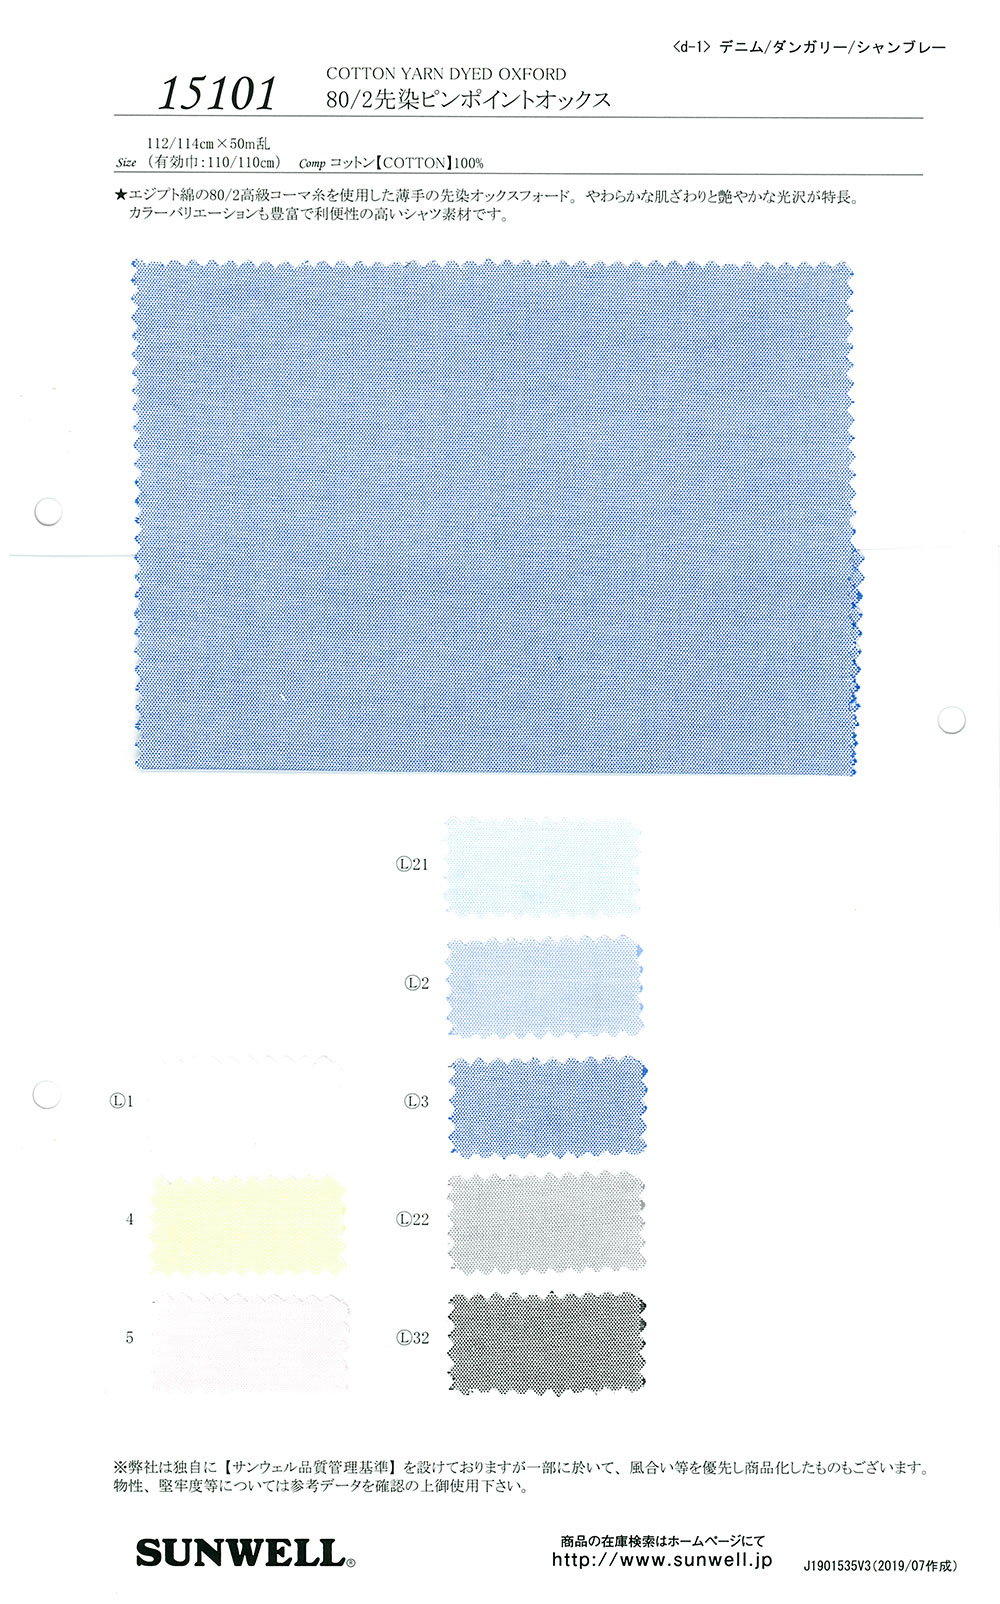 15101 Oxford Pinpoint Teñido En Hilo 80/2[Fabrica Textil] SUNWELL